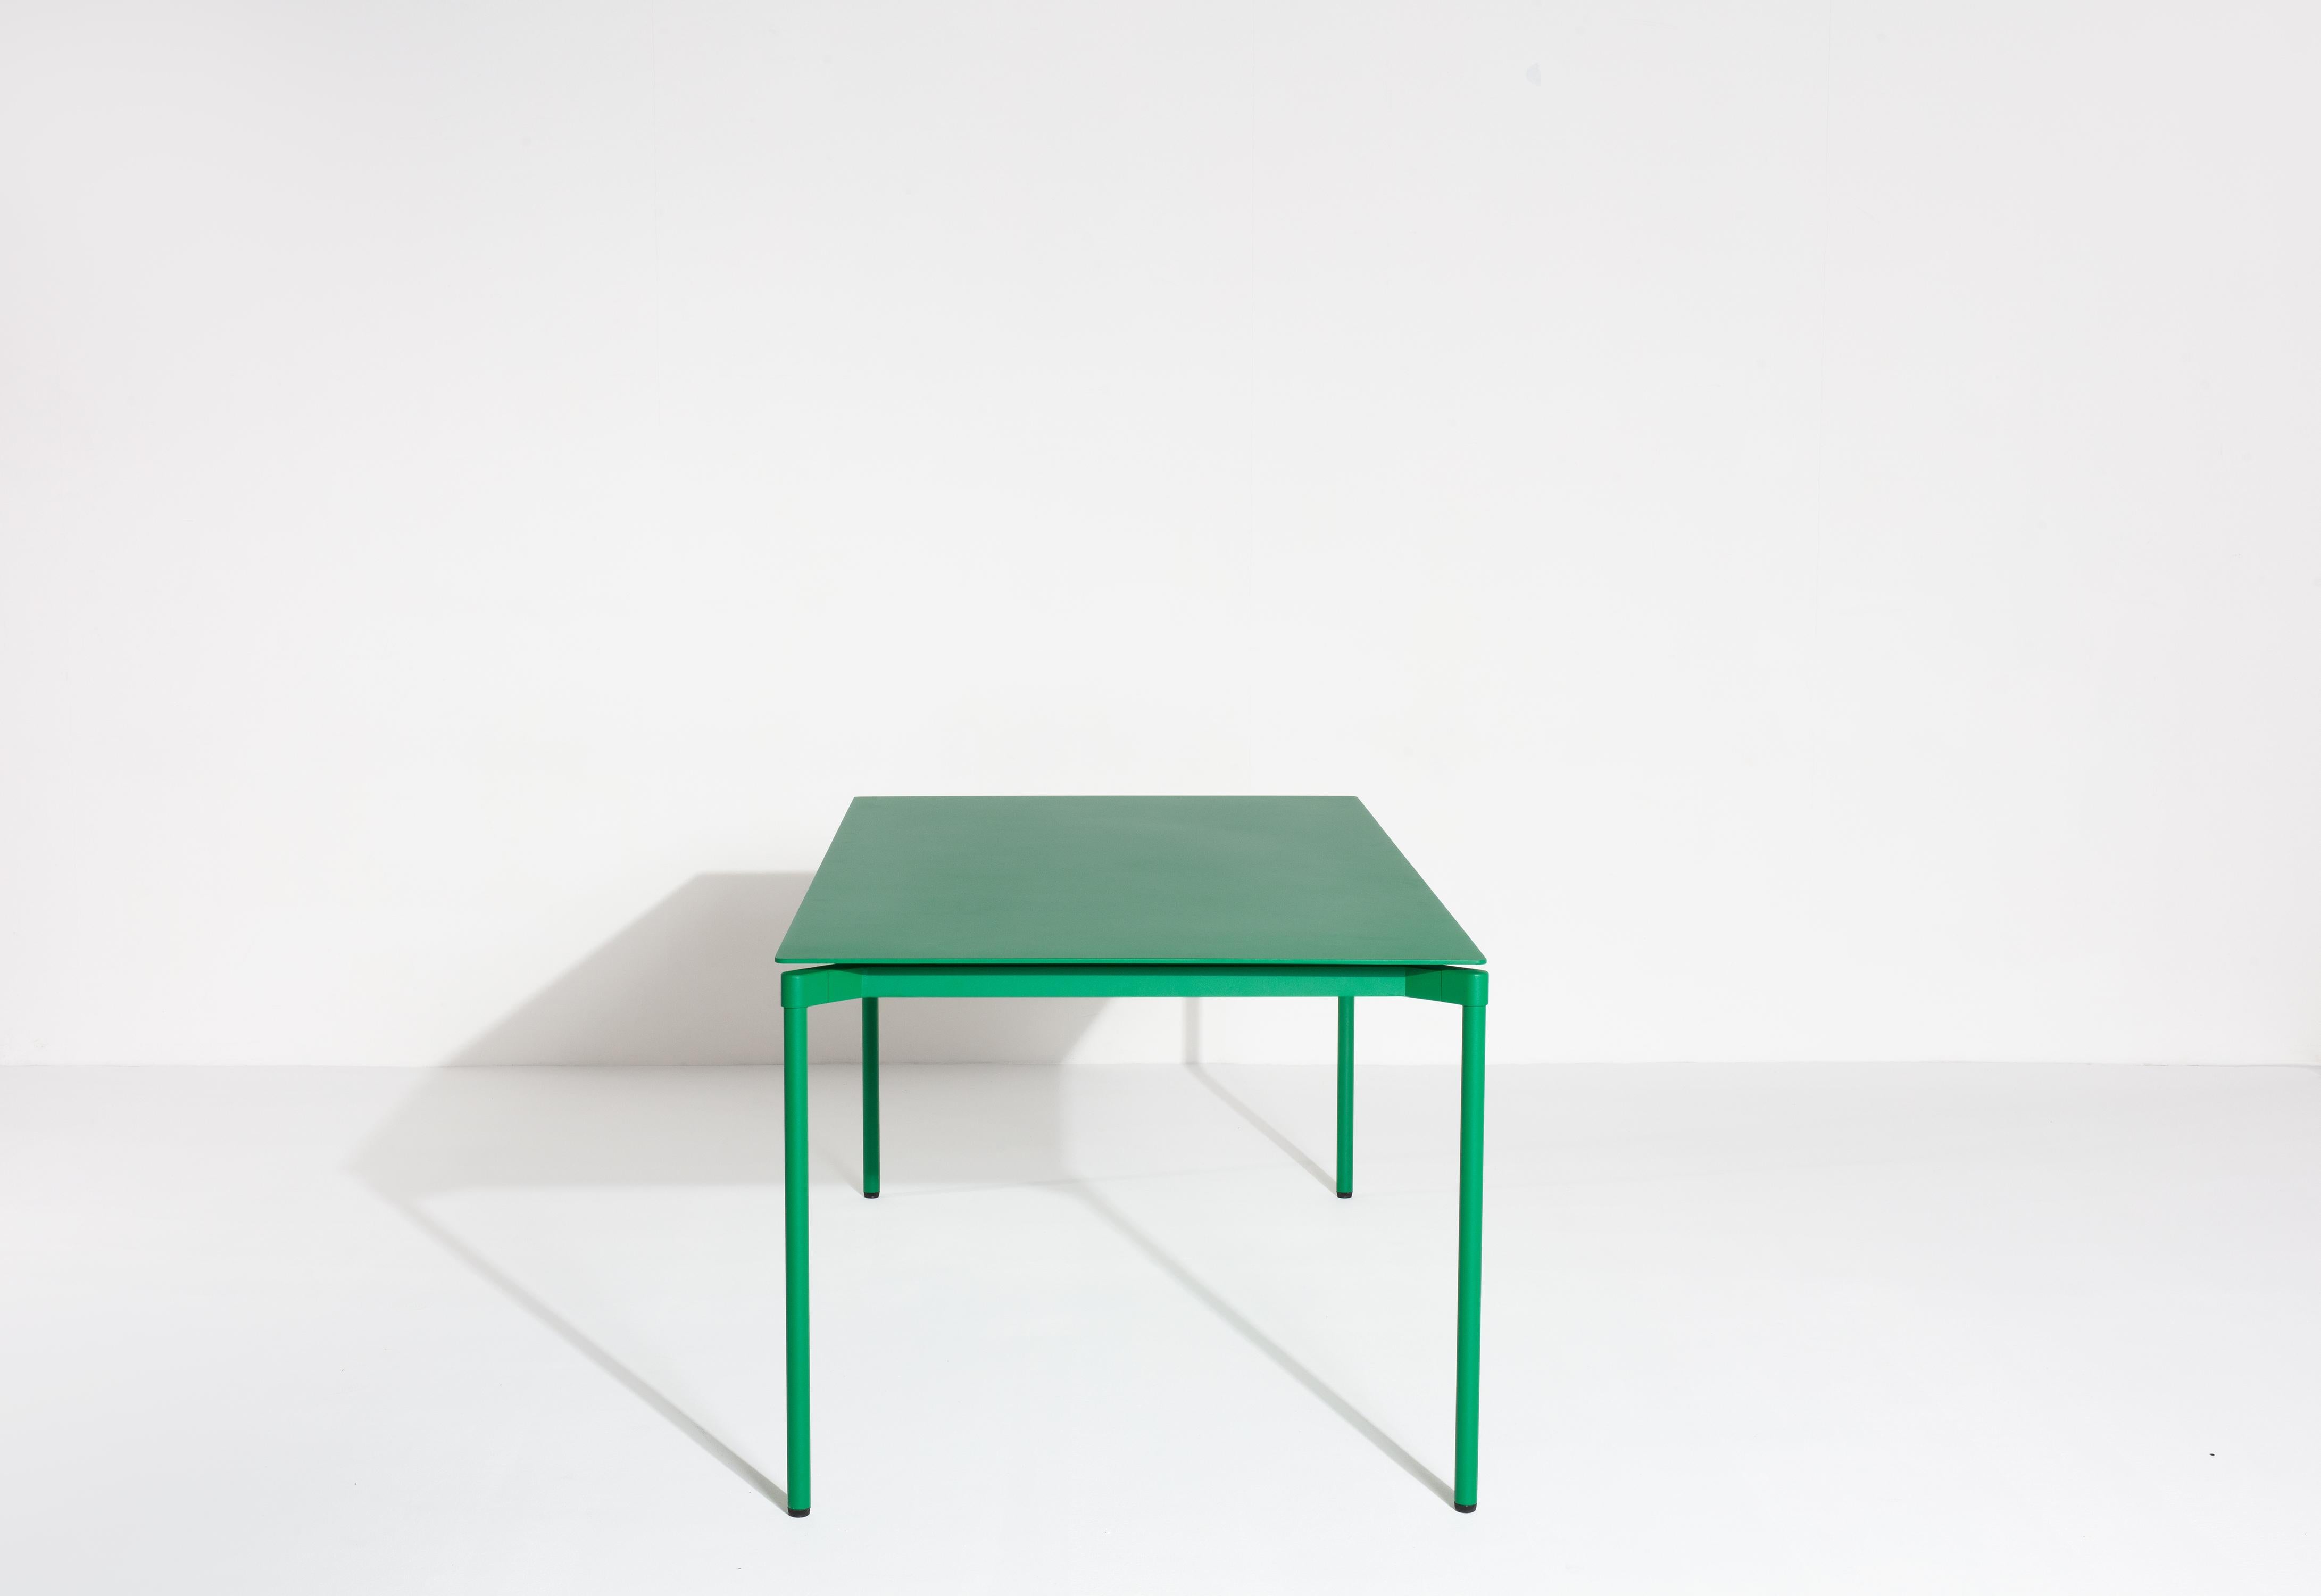 Contemporary Petite Friture Fromme Rectangular Table in Mint-Green Aluminium by Tom Chung For Sale